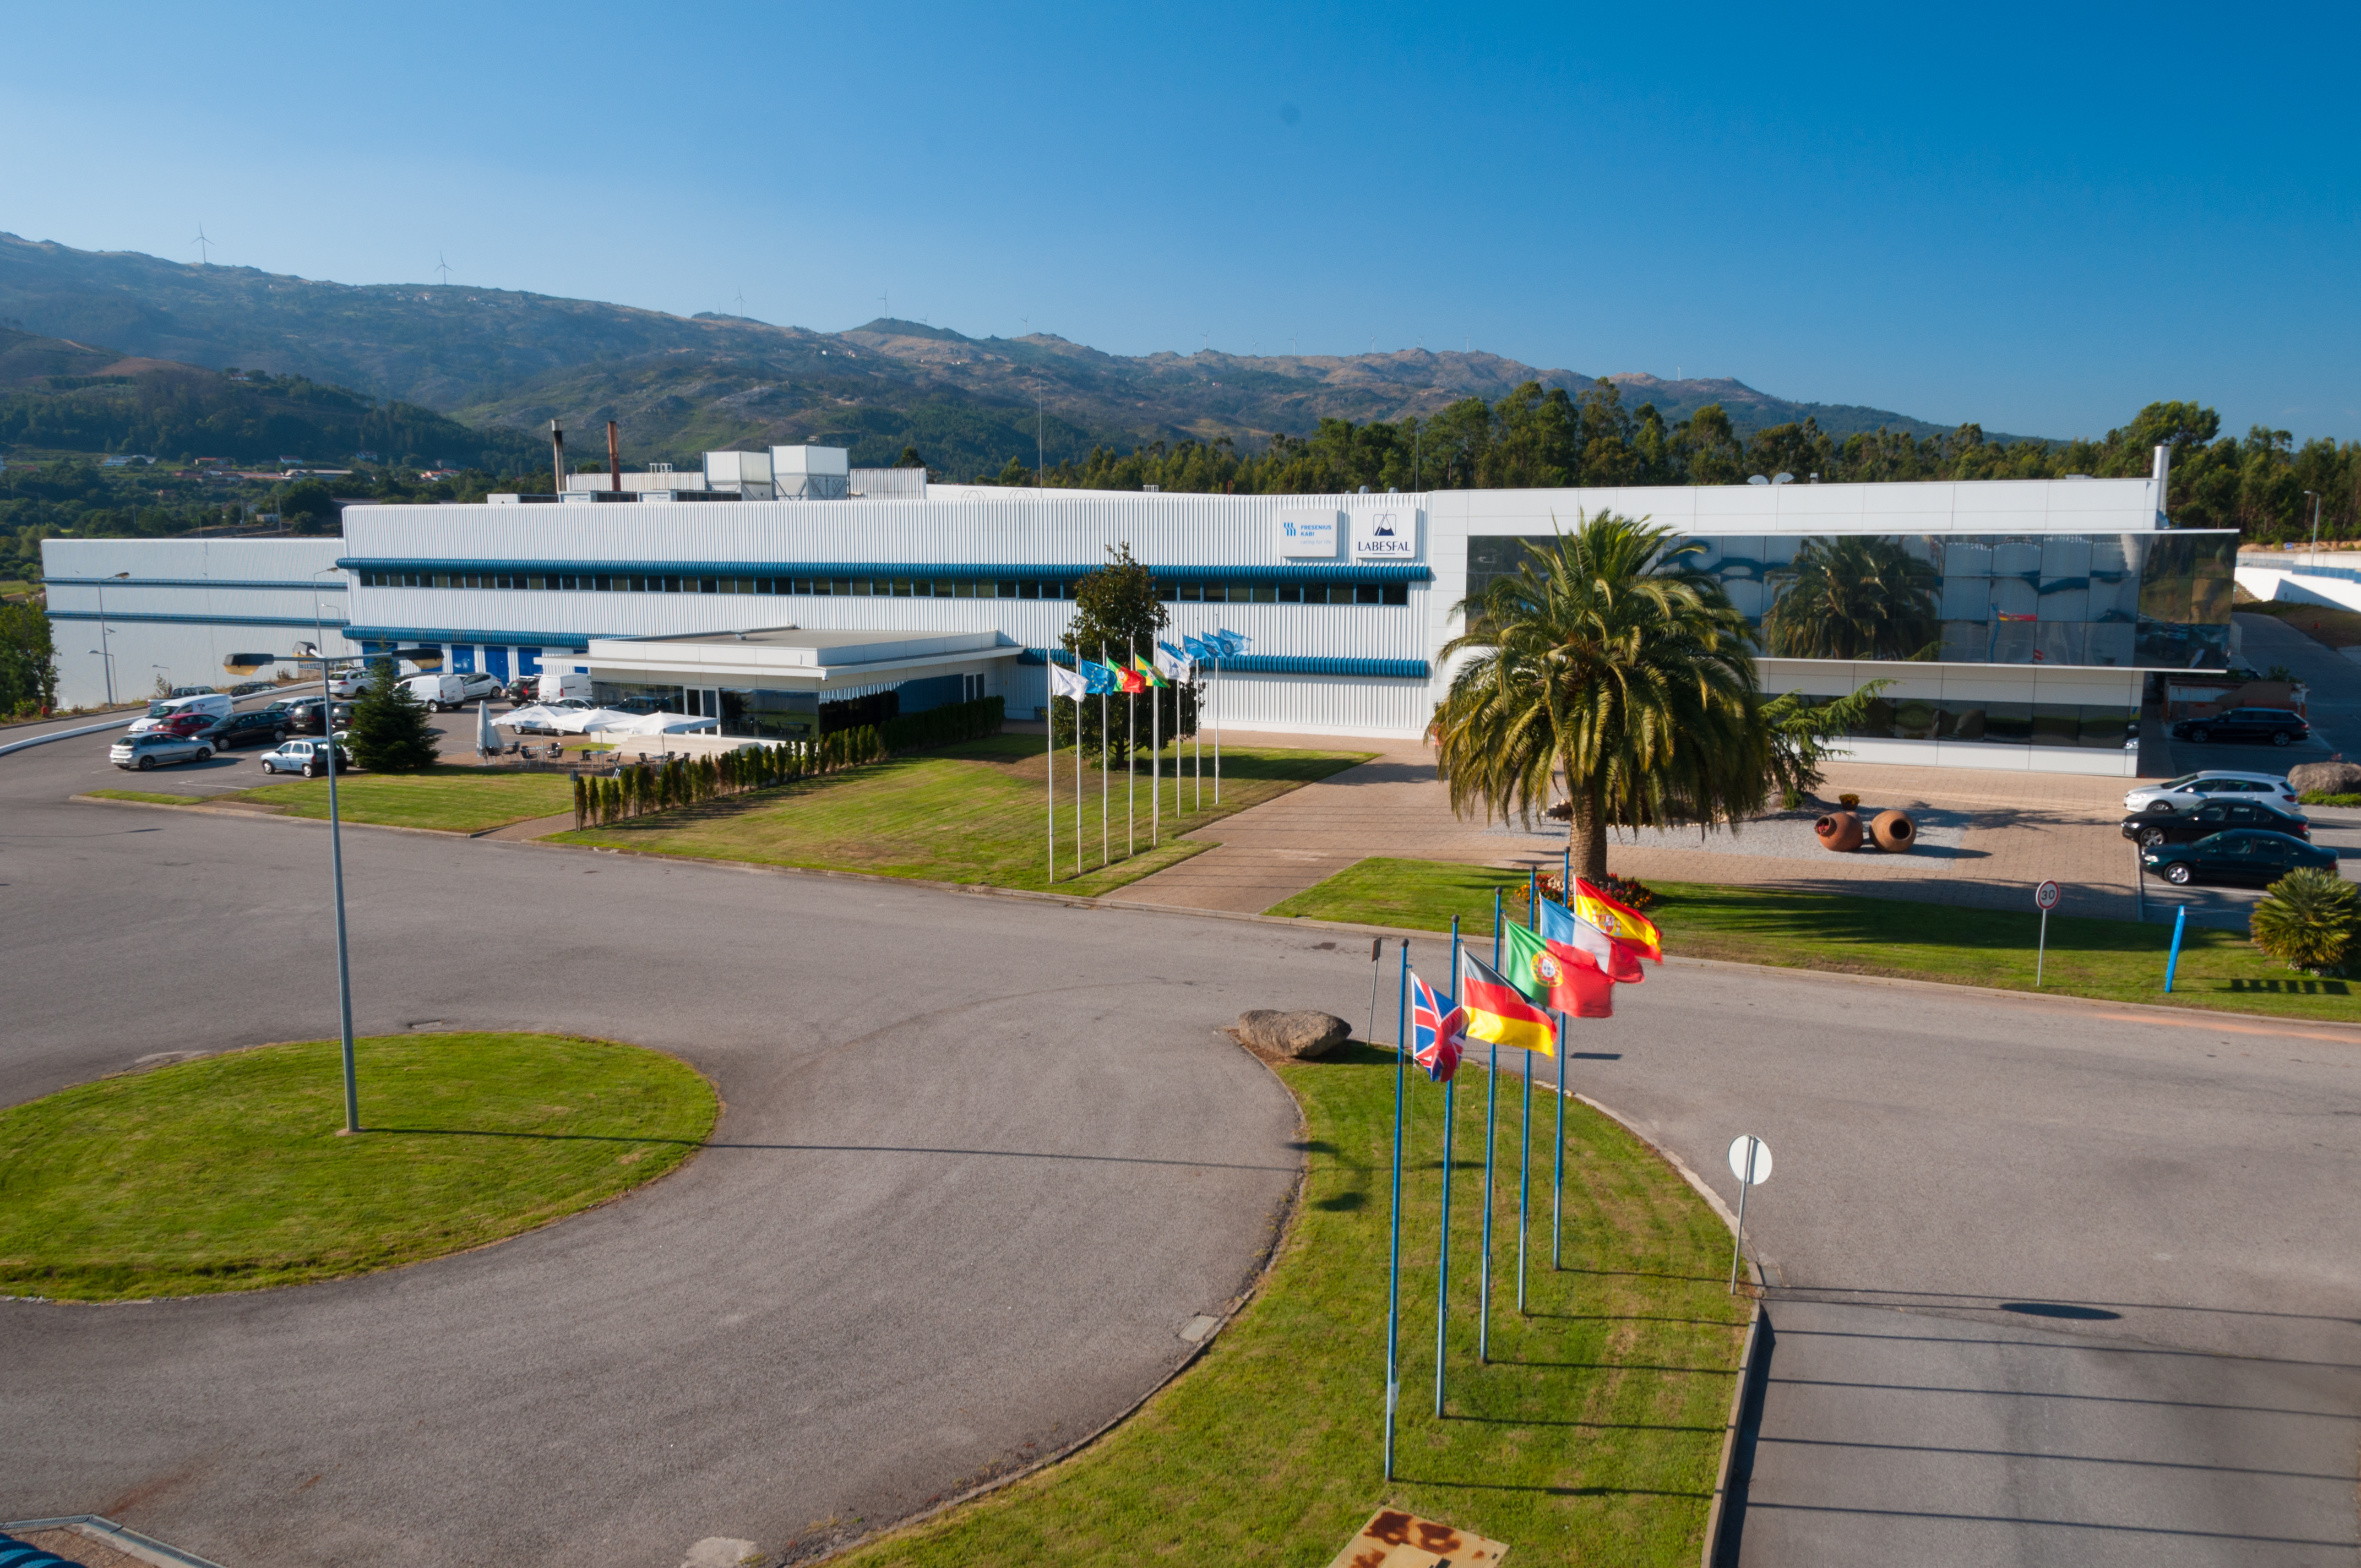 Fresenius Kabi production site in Labesfal, Portugal